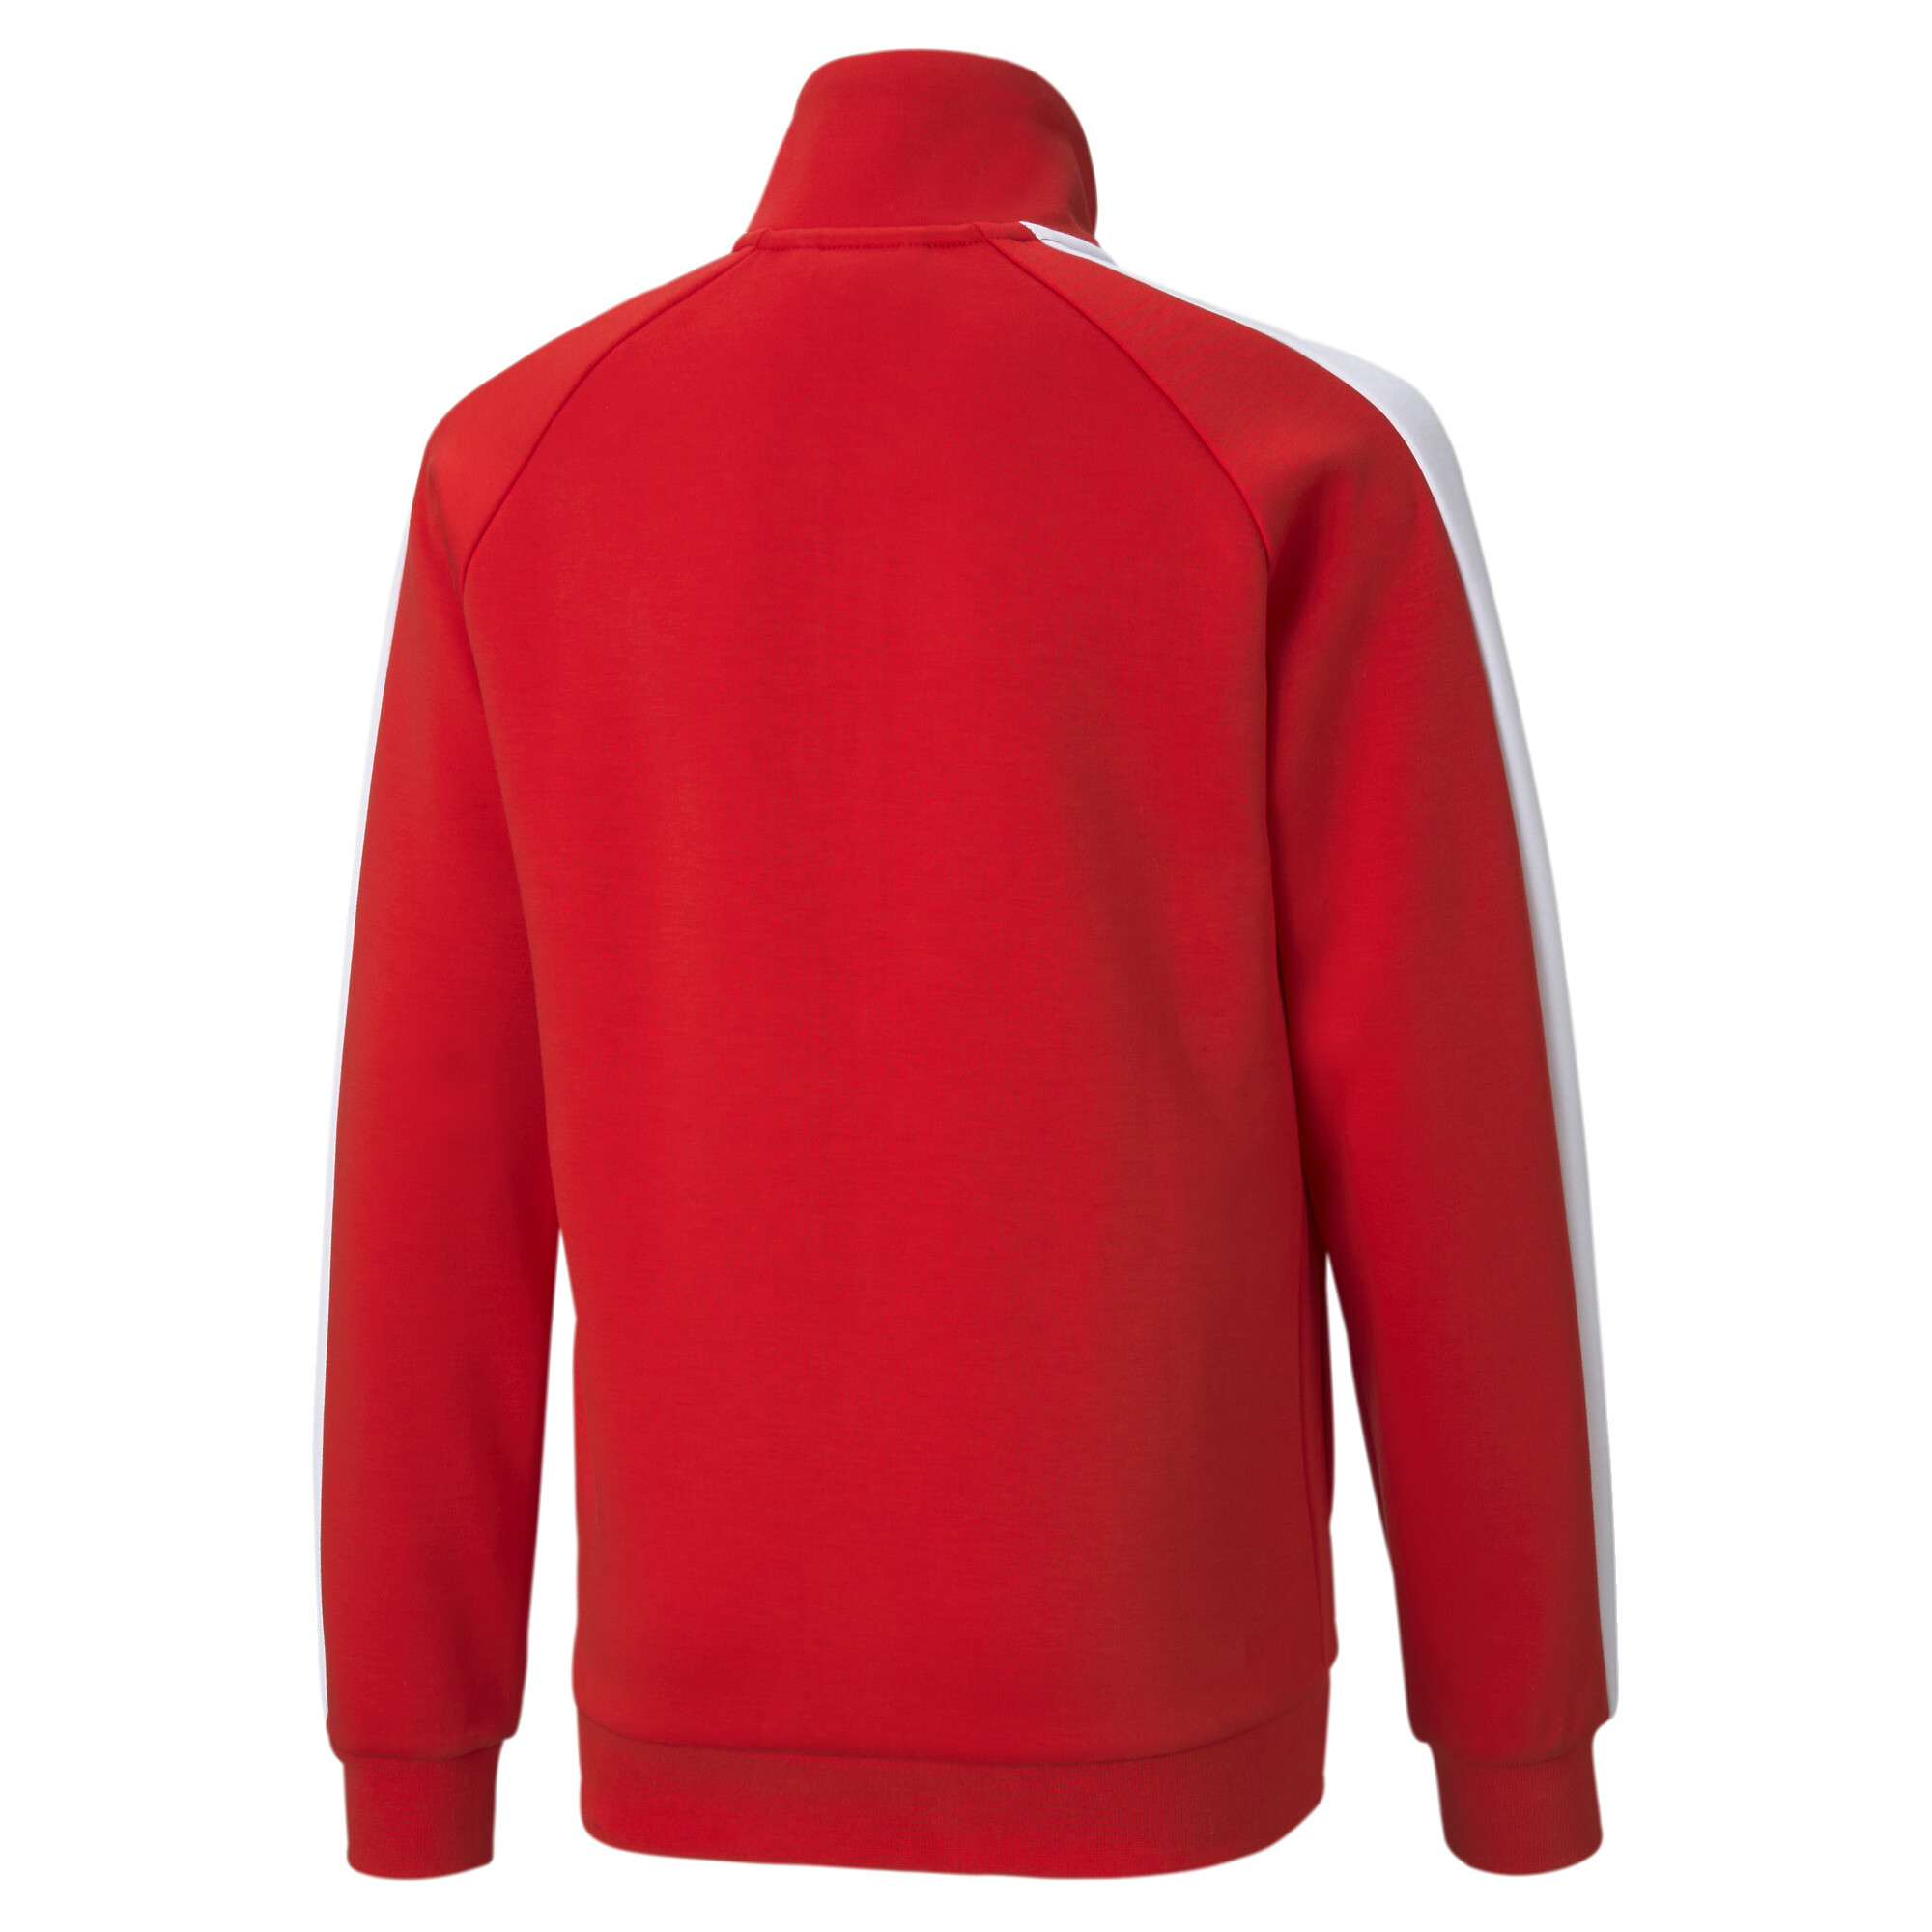 PUMA Iconic T7 Track Jacket In Red, Size 13-14 Youth